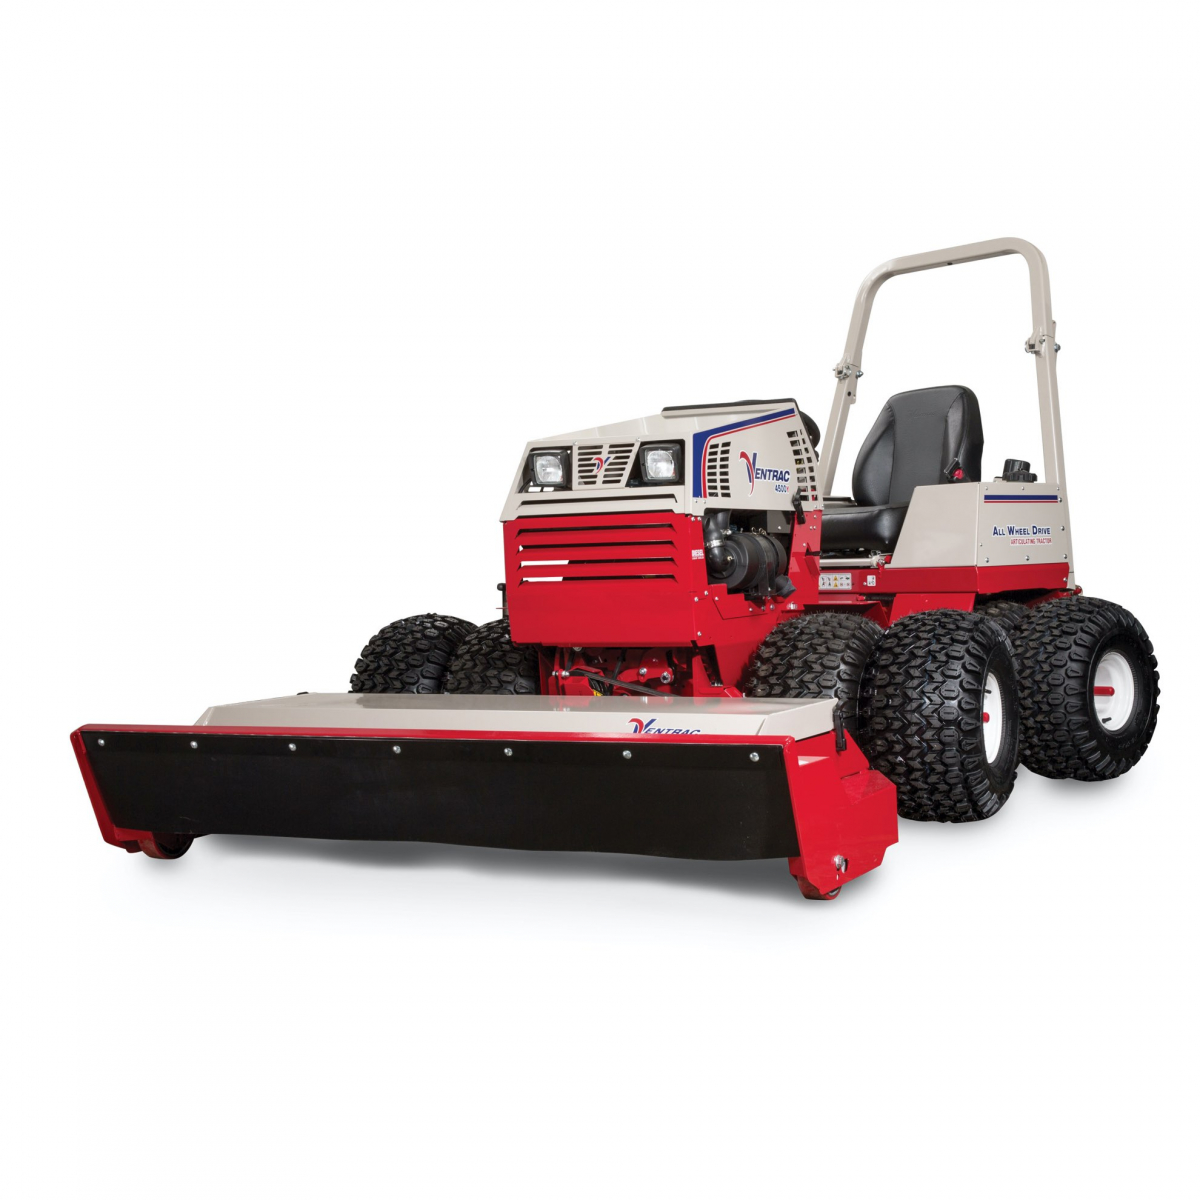 Ventrac 4500Y with 58" Touch Cut Deck and Dual Wheels